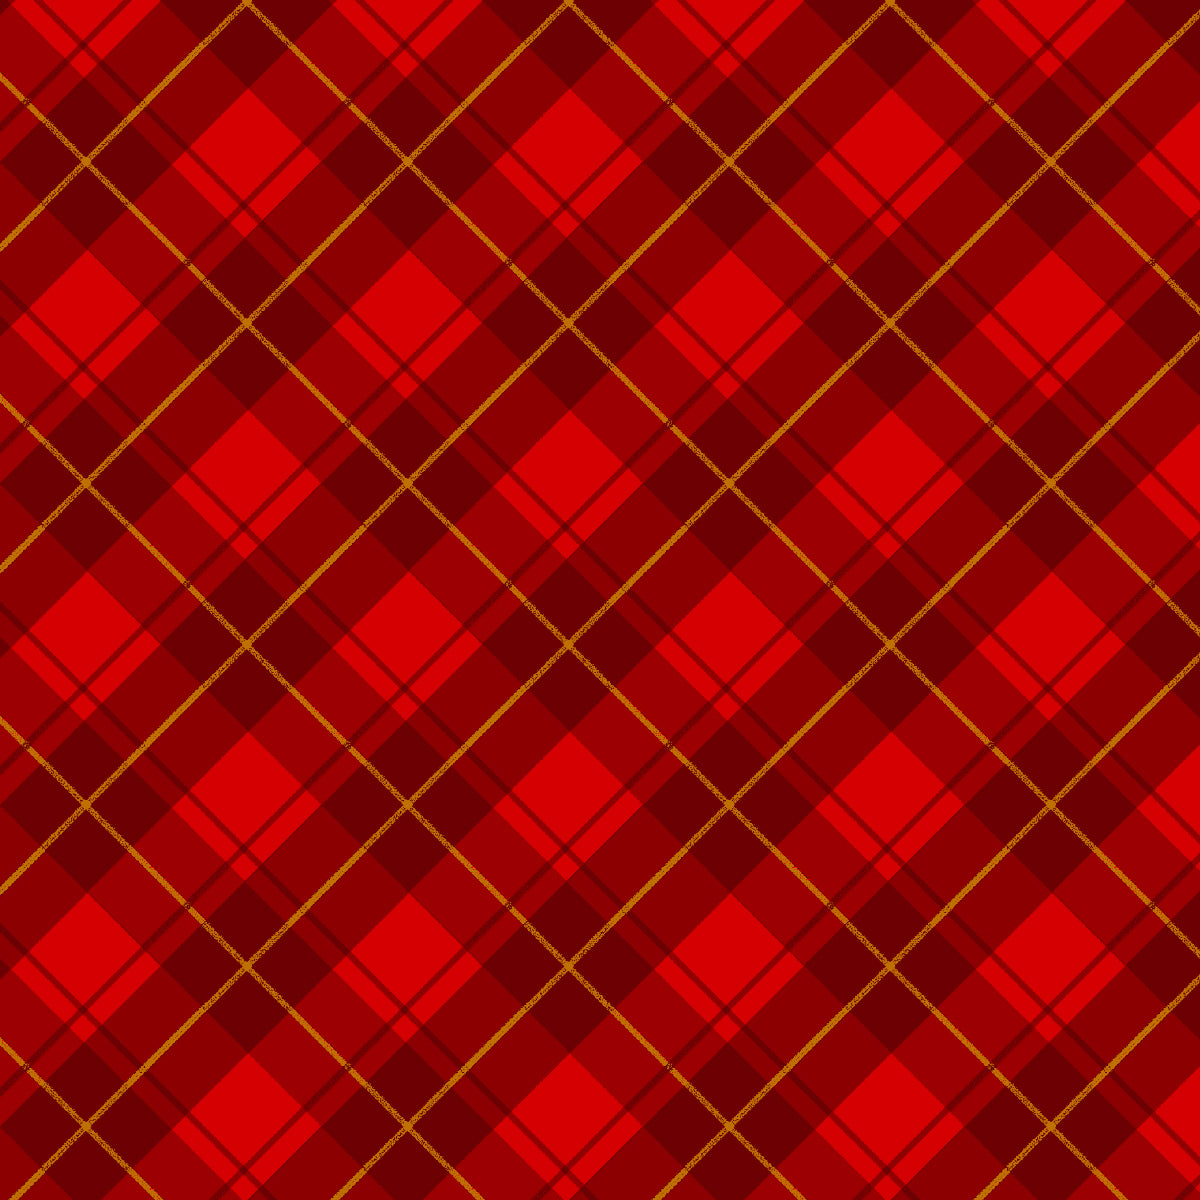 Studioe Merry Town Diagonal Plaid Red Cotton Fabric by The Yard